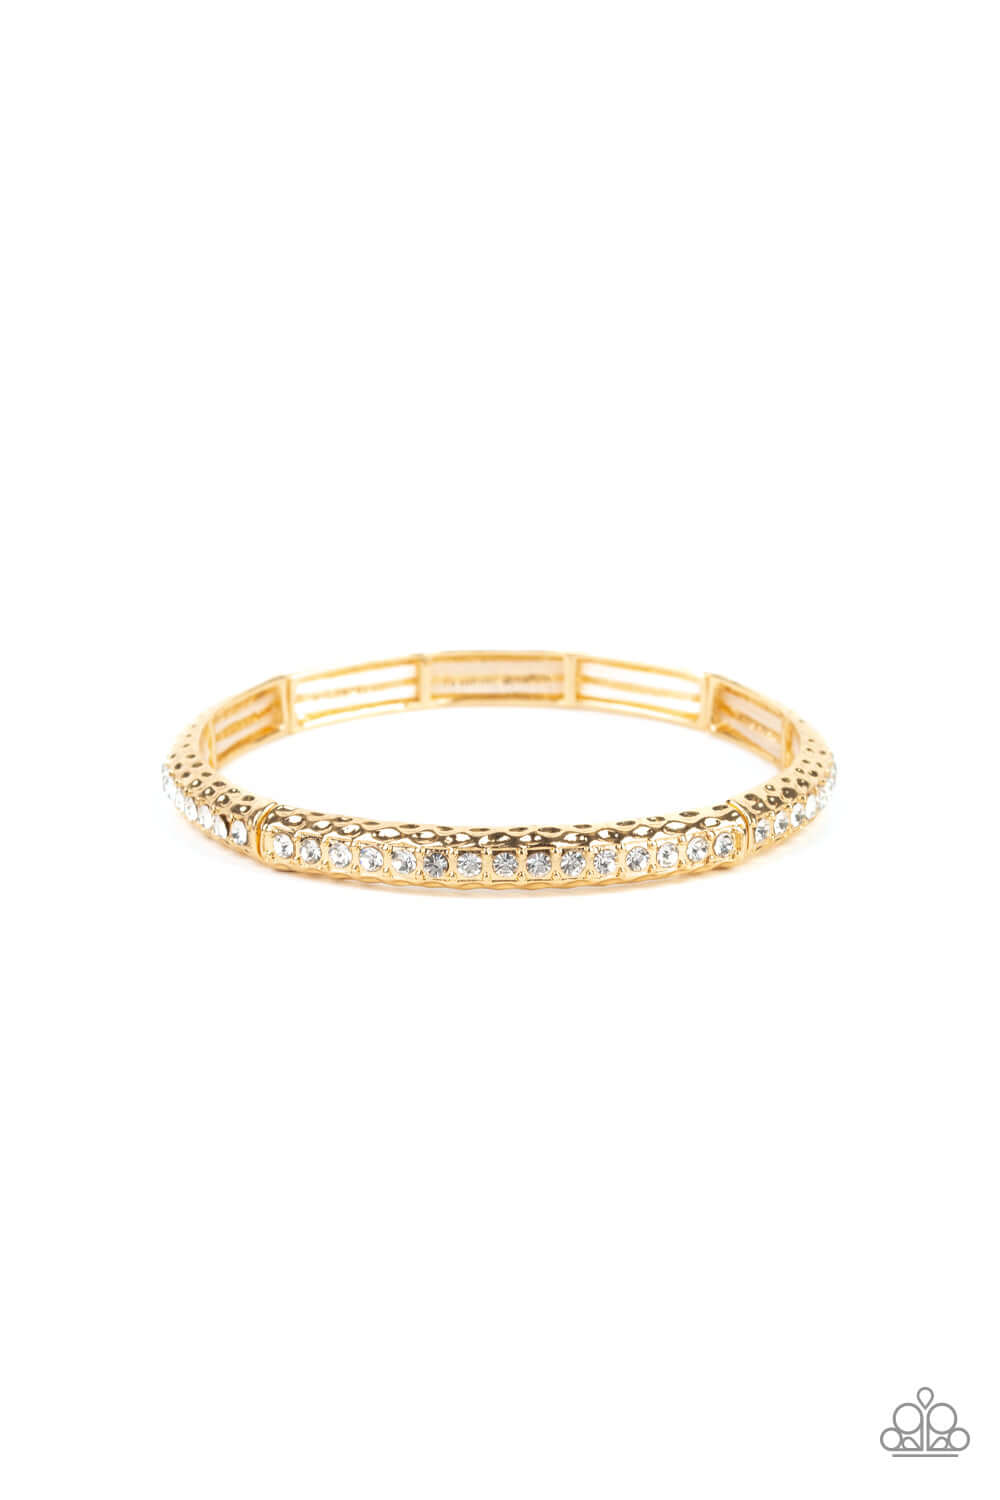 Cha Cha Ching! - Gold Bracelet - TheMasterCollection